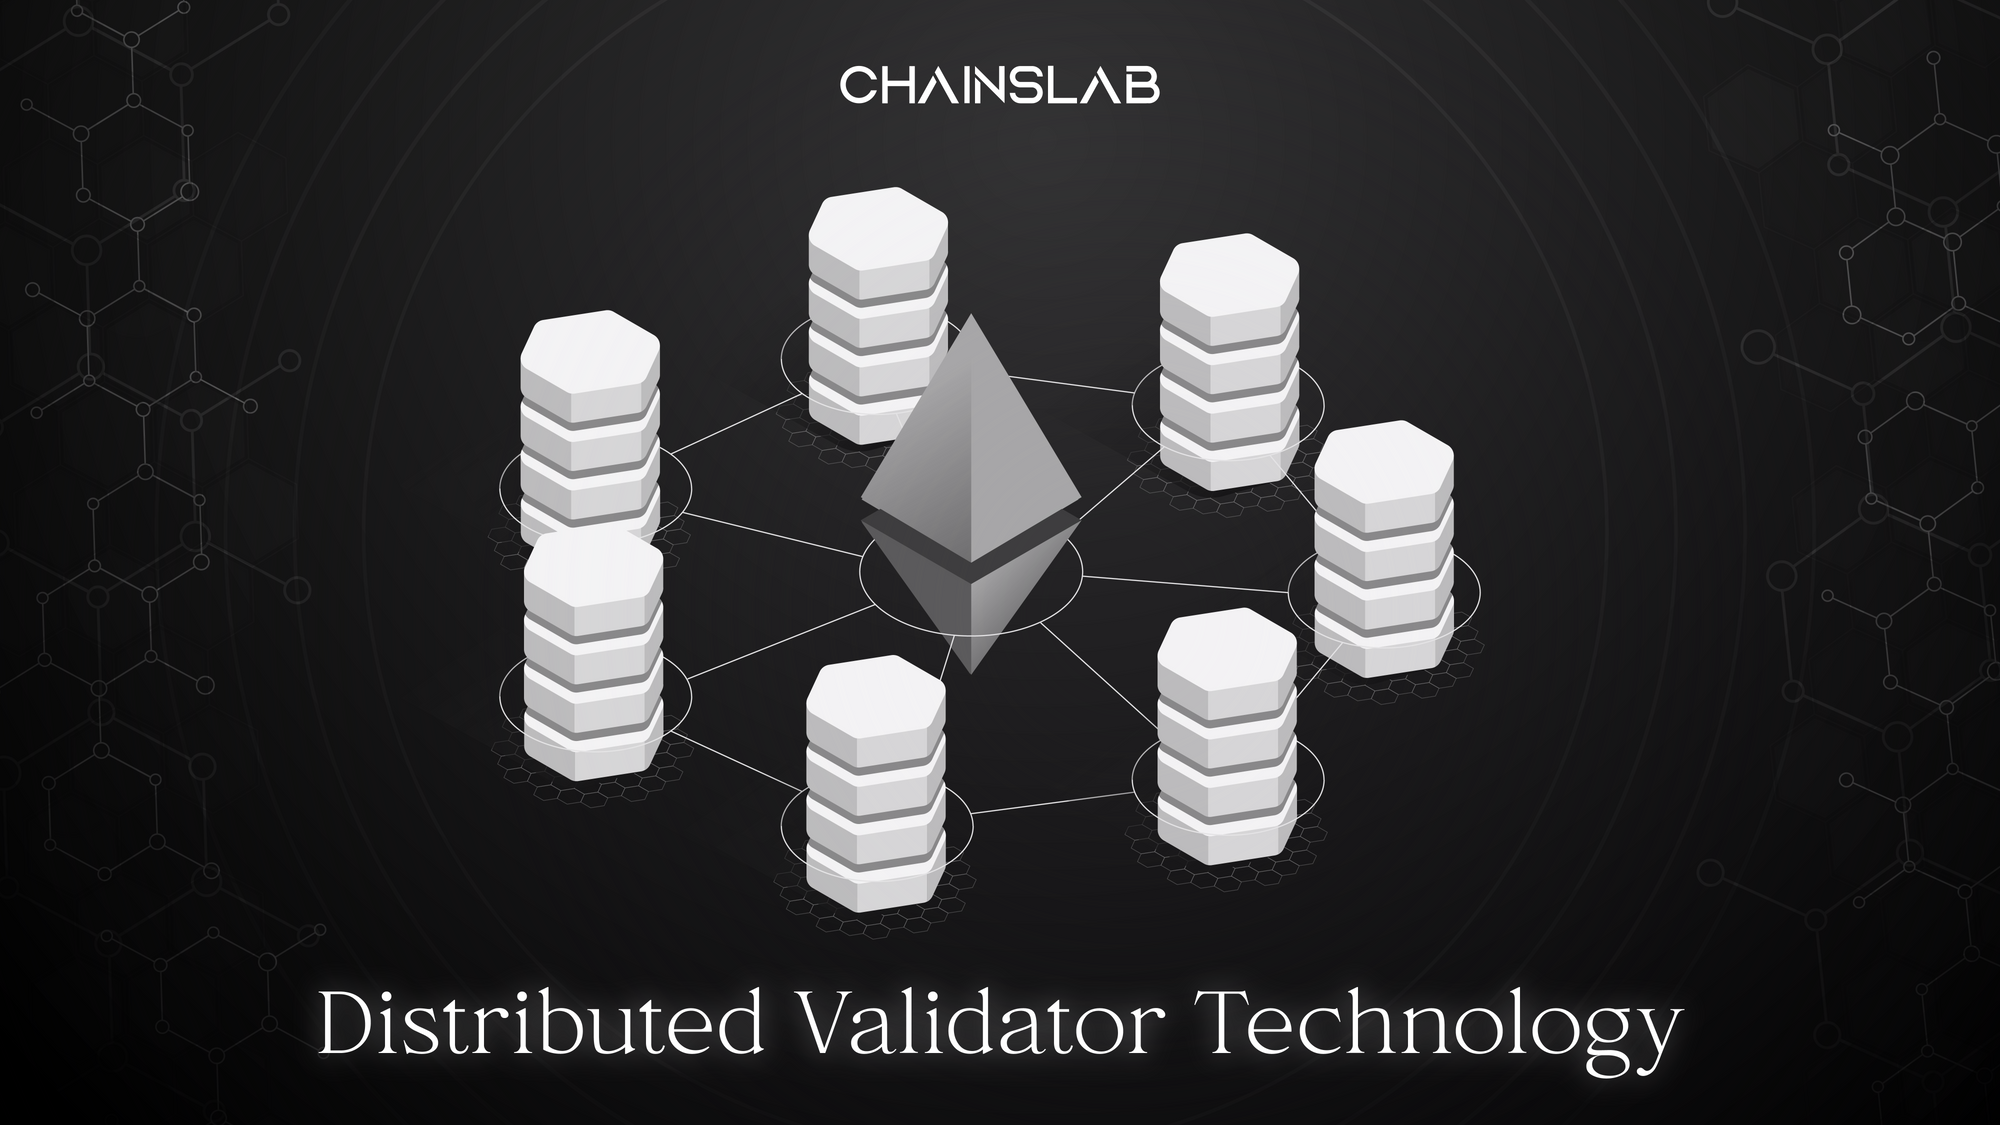 What is Distributed Validator Technology?